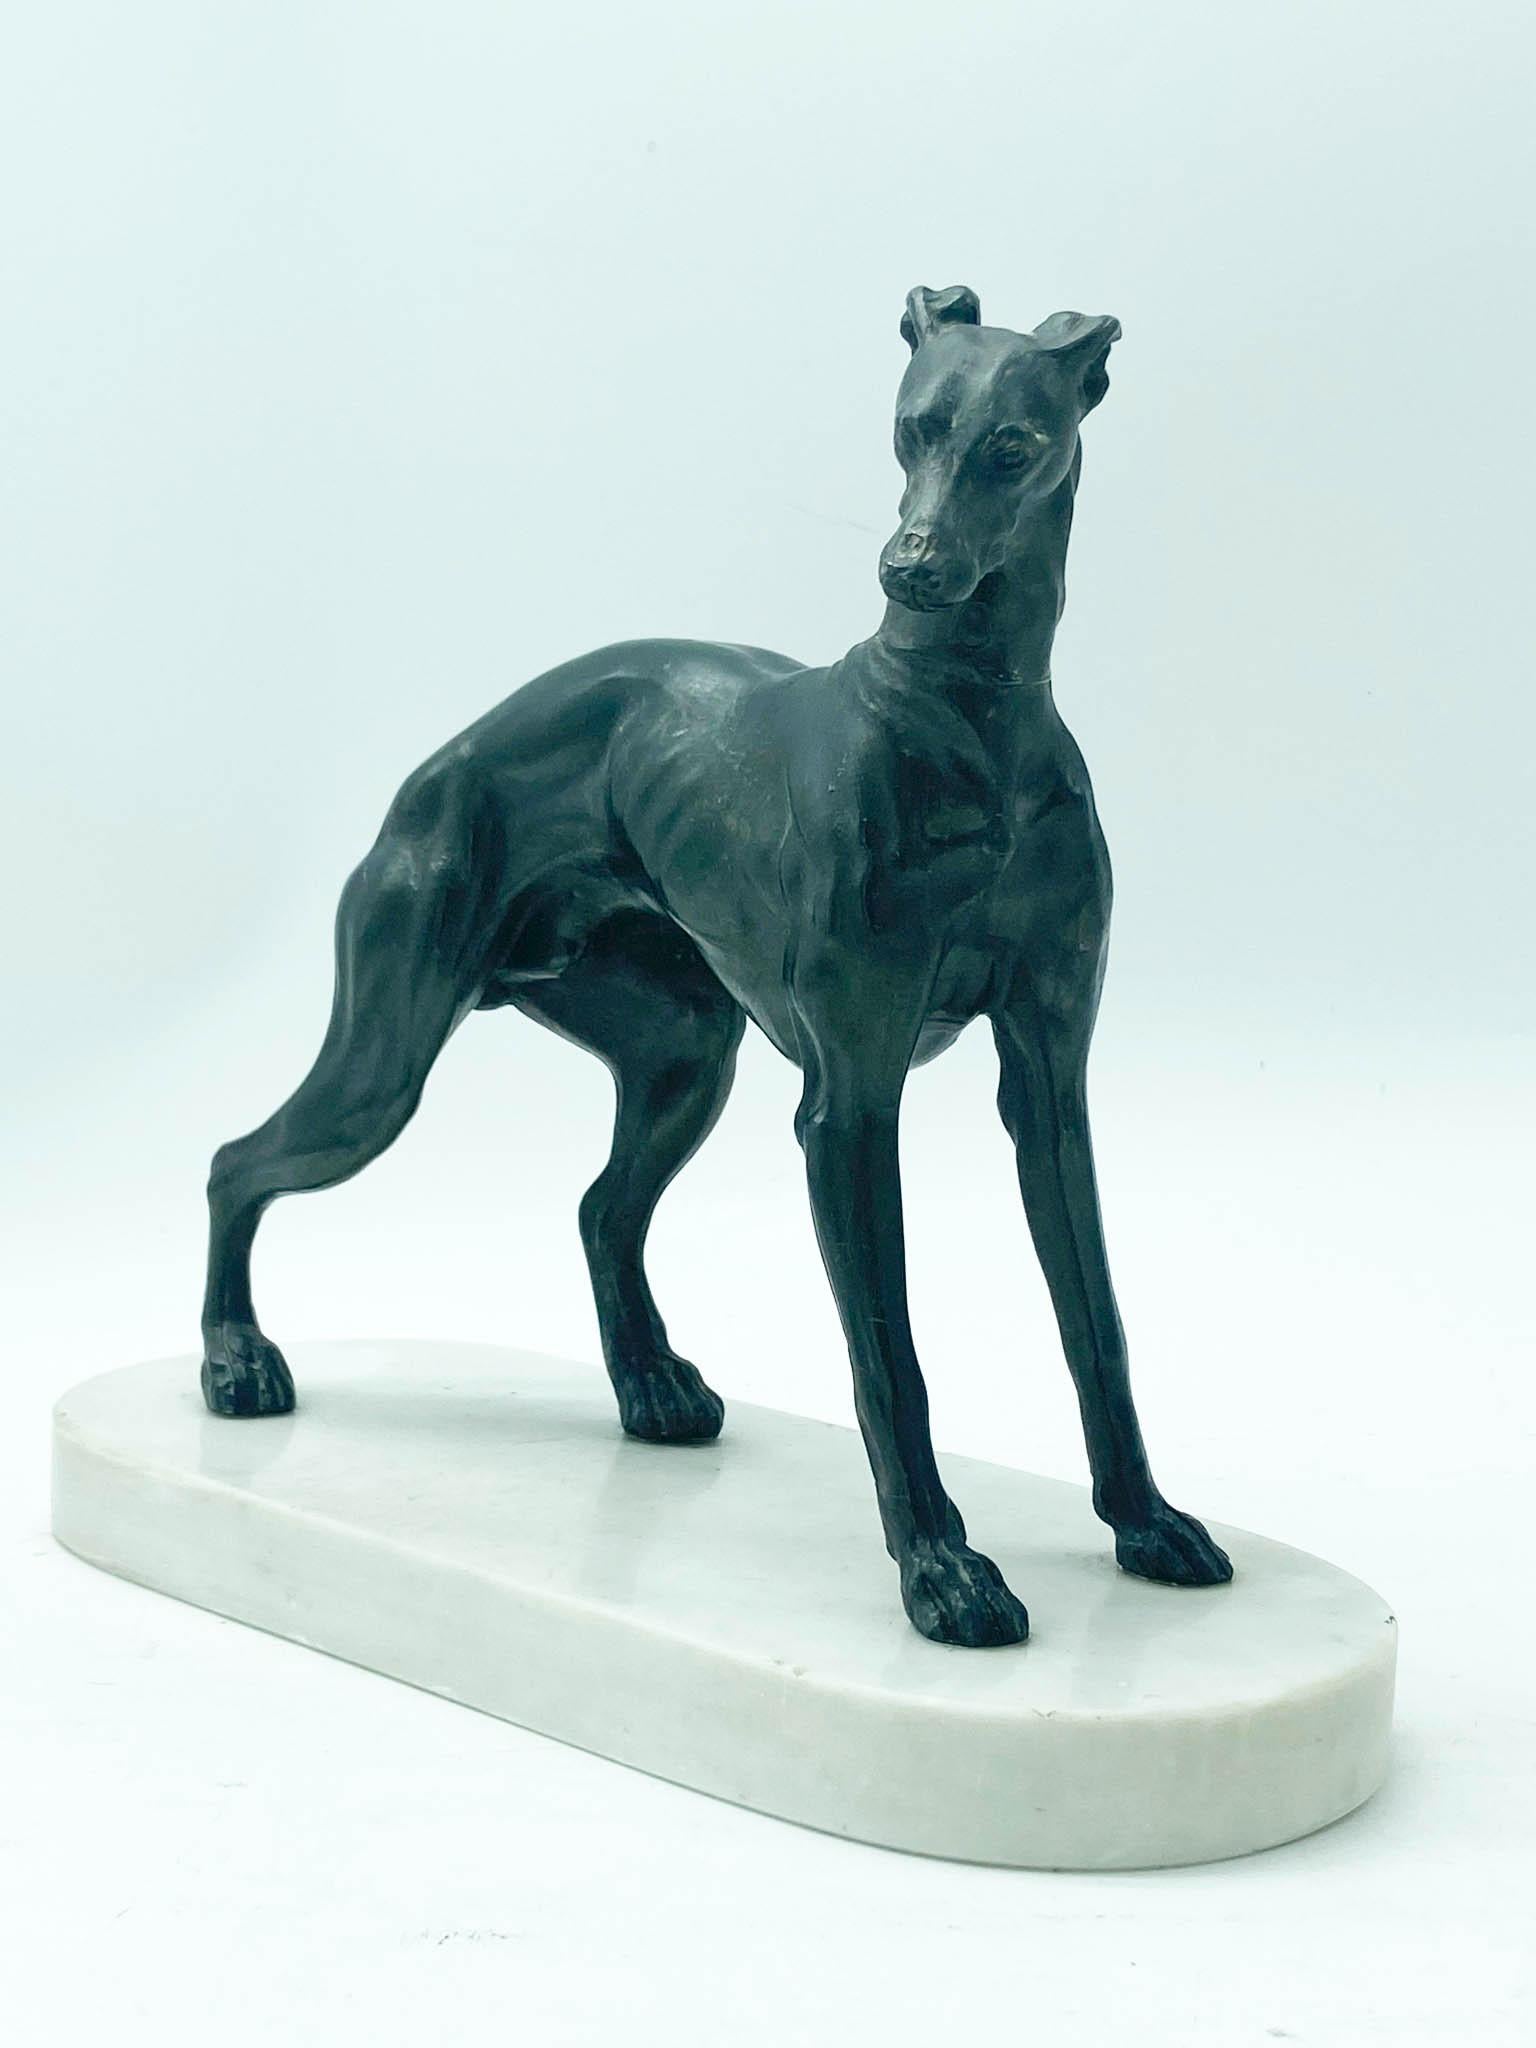 Bronze sculpture representing a beautiful alert and elegant dog on a white marble surface. In excellent condition with slight patina wear.